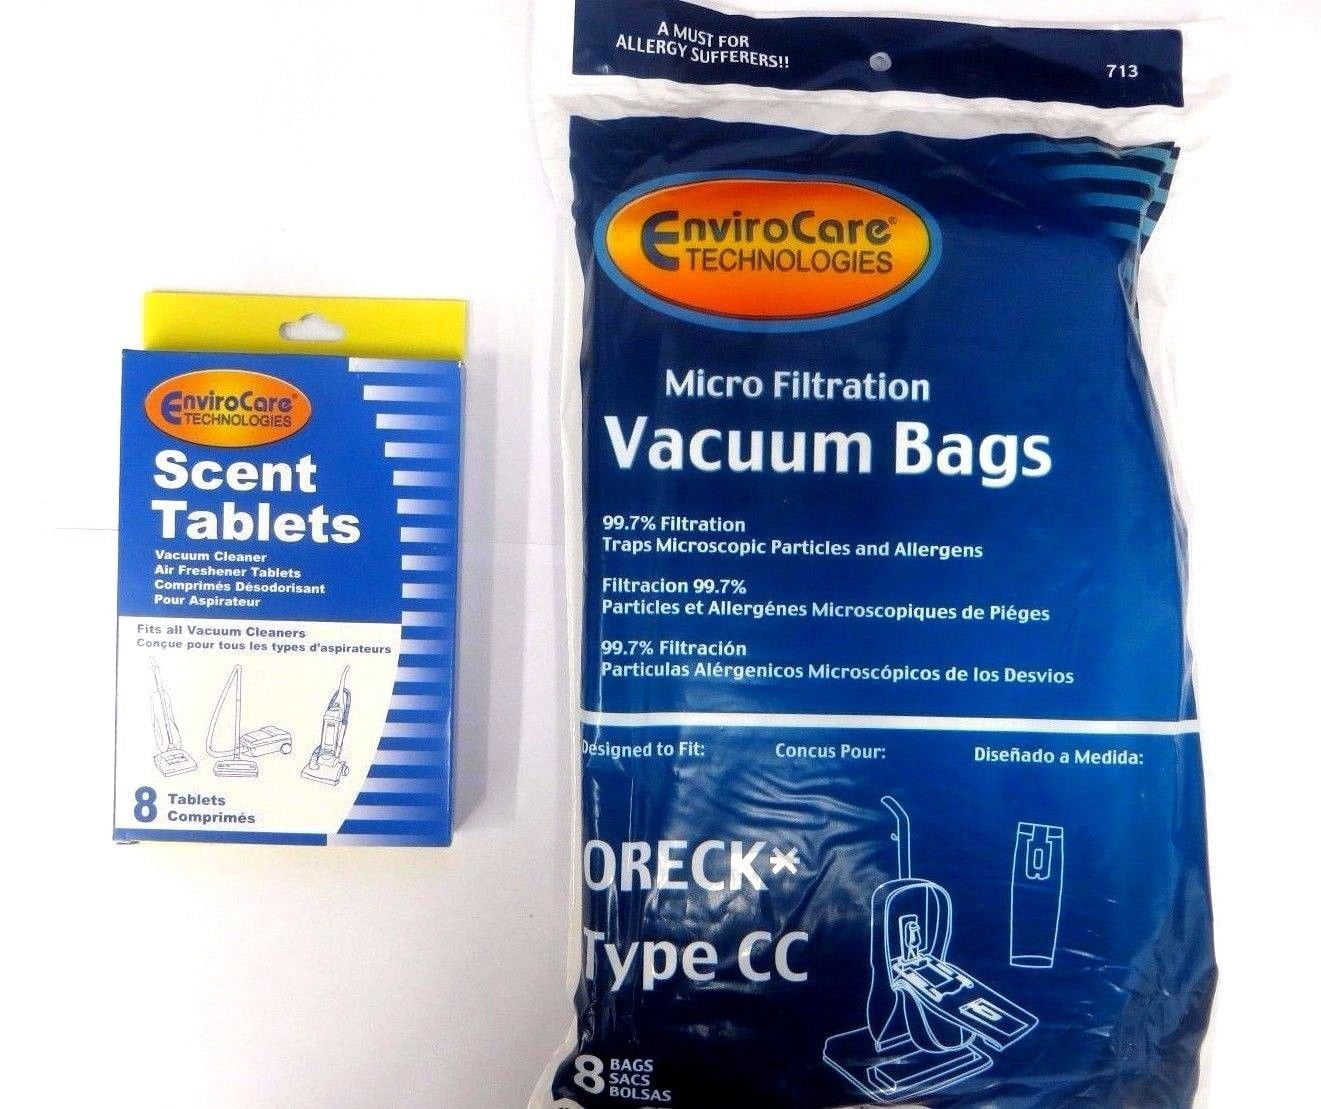 Oreck Buster B Allergen Handheld Vacuum Bags BB PKBB12DW Micro Lined Style Vac